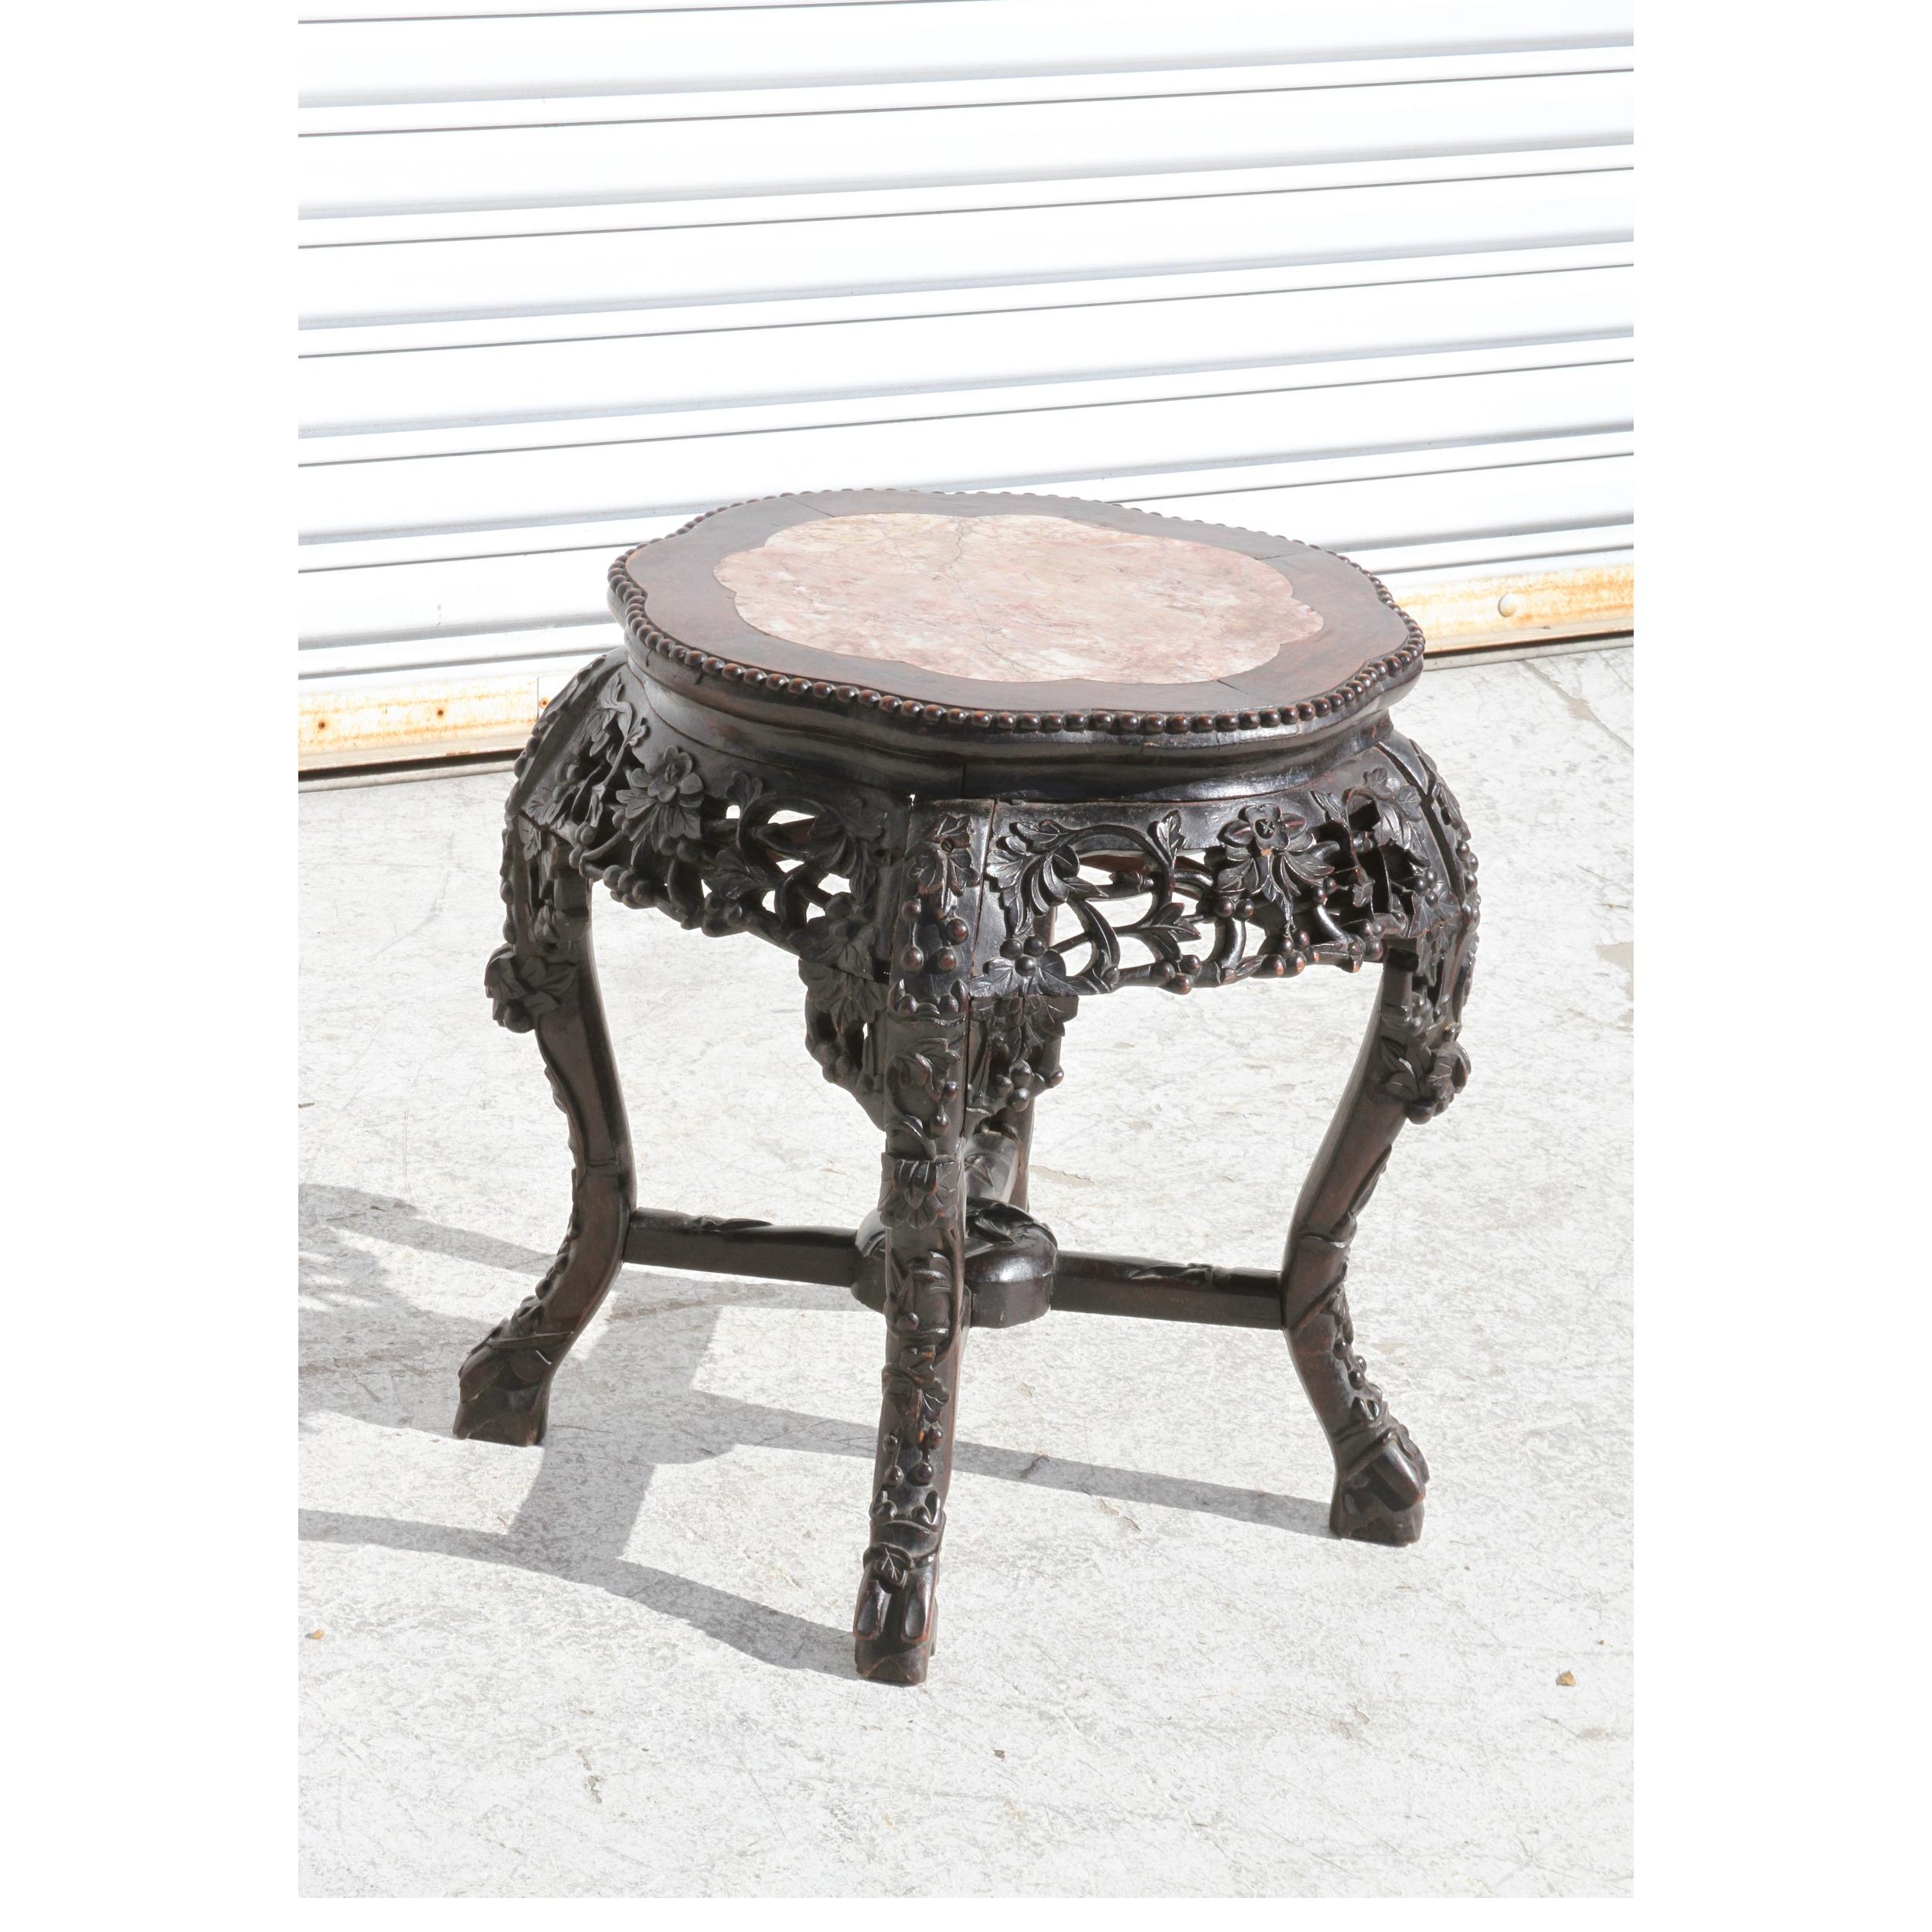 Antique Chinese rosewood shaped stool or pedestal stand . Beaded Edge with marble insert top, The rose wood is mature and smooth to the touch.